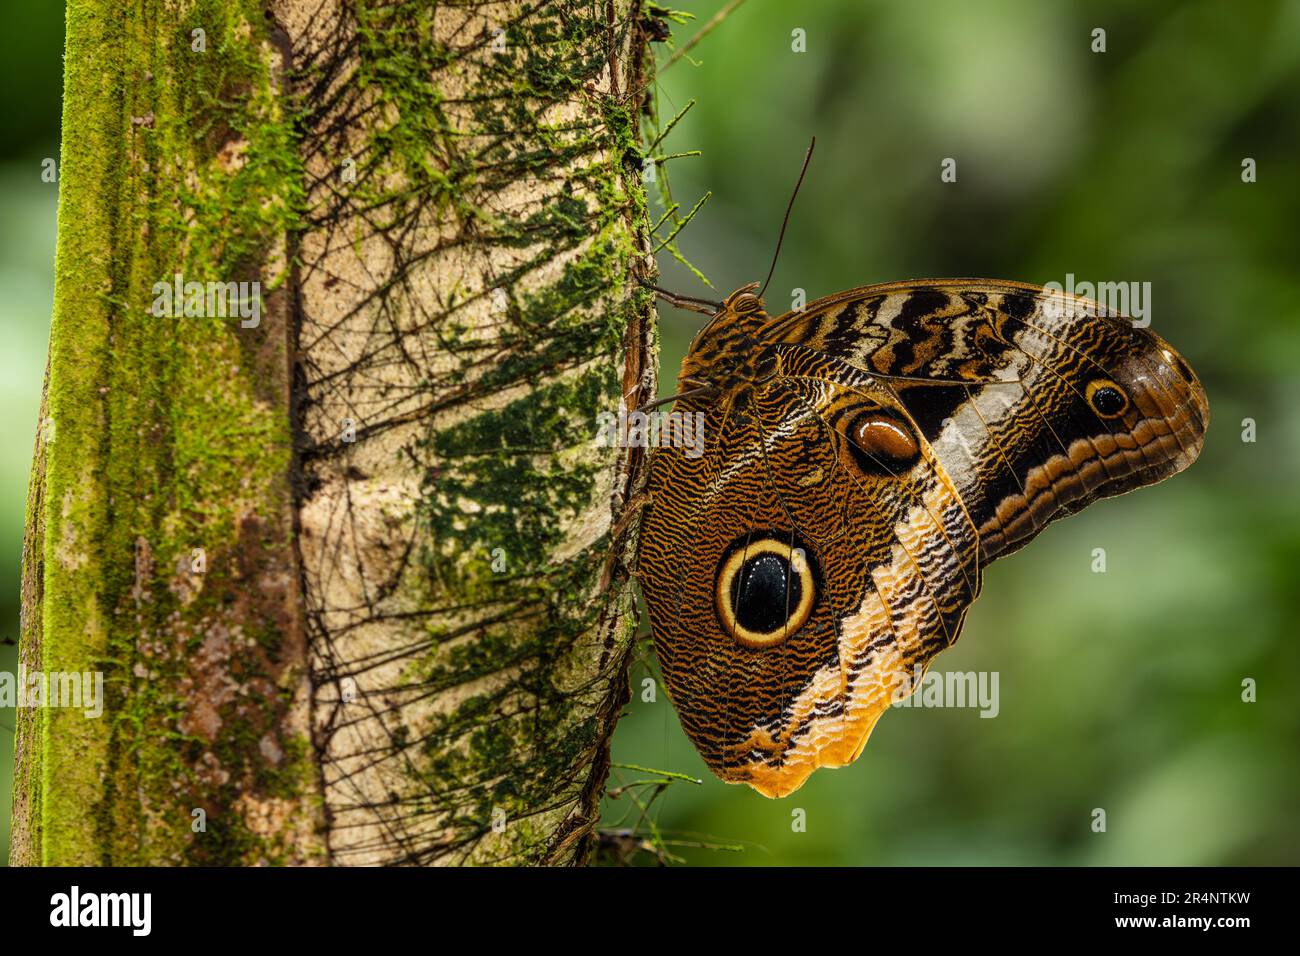 Giant owl butterfly  - Caligo memnon, beautiful large butterfly from Central America forests, Mexico. Stock Photo